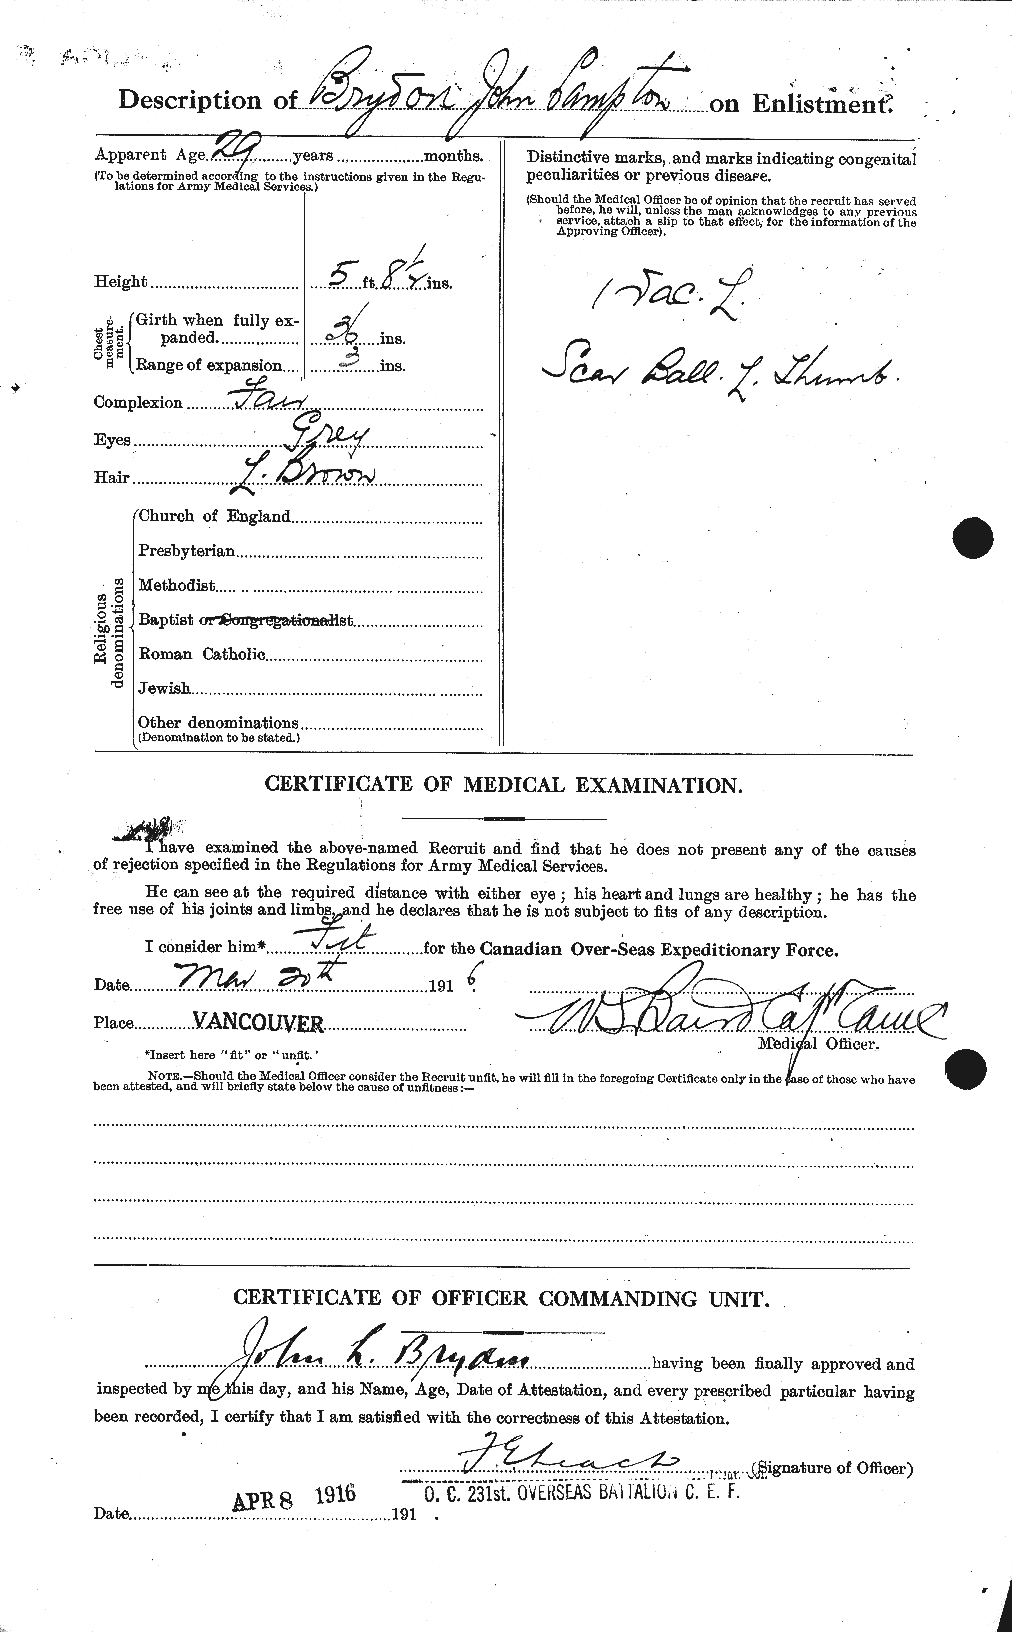 Personnel Records of the First World War - CEF 268839b